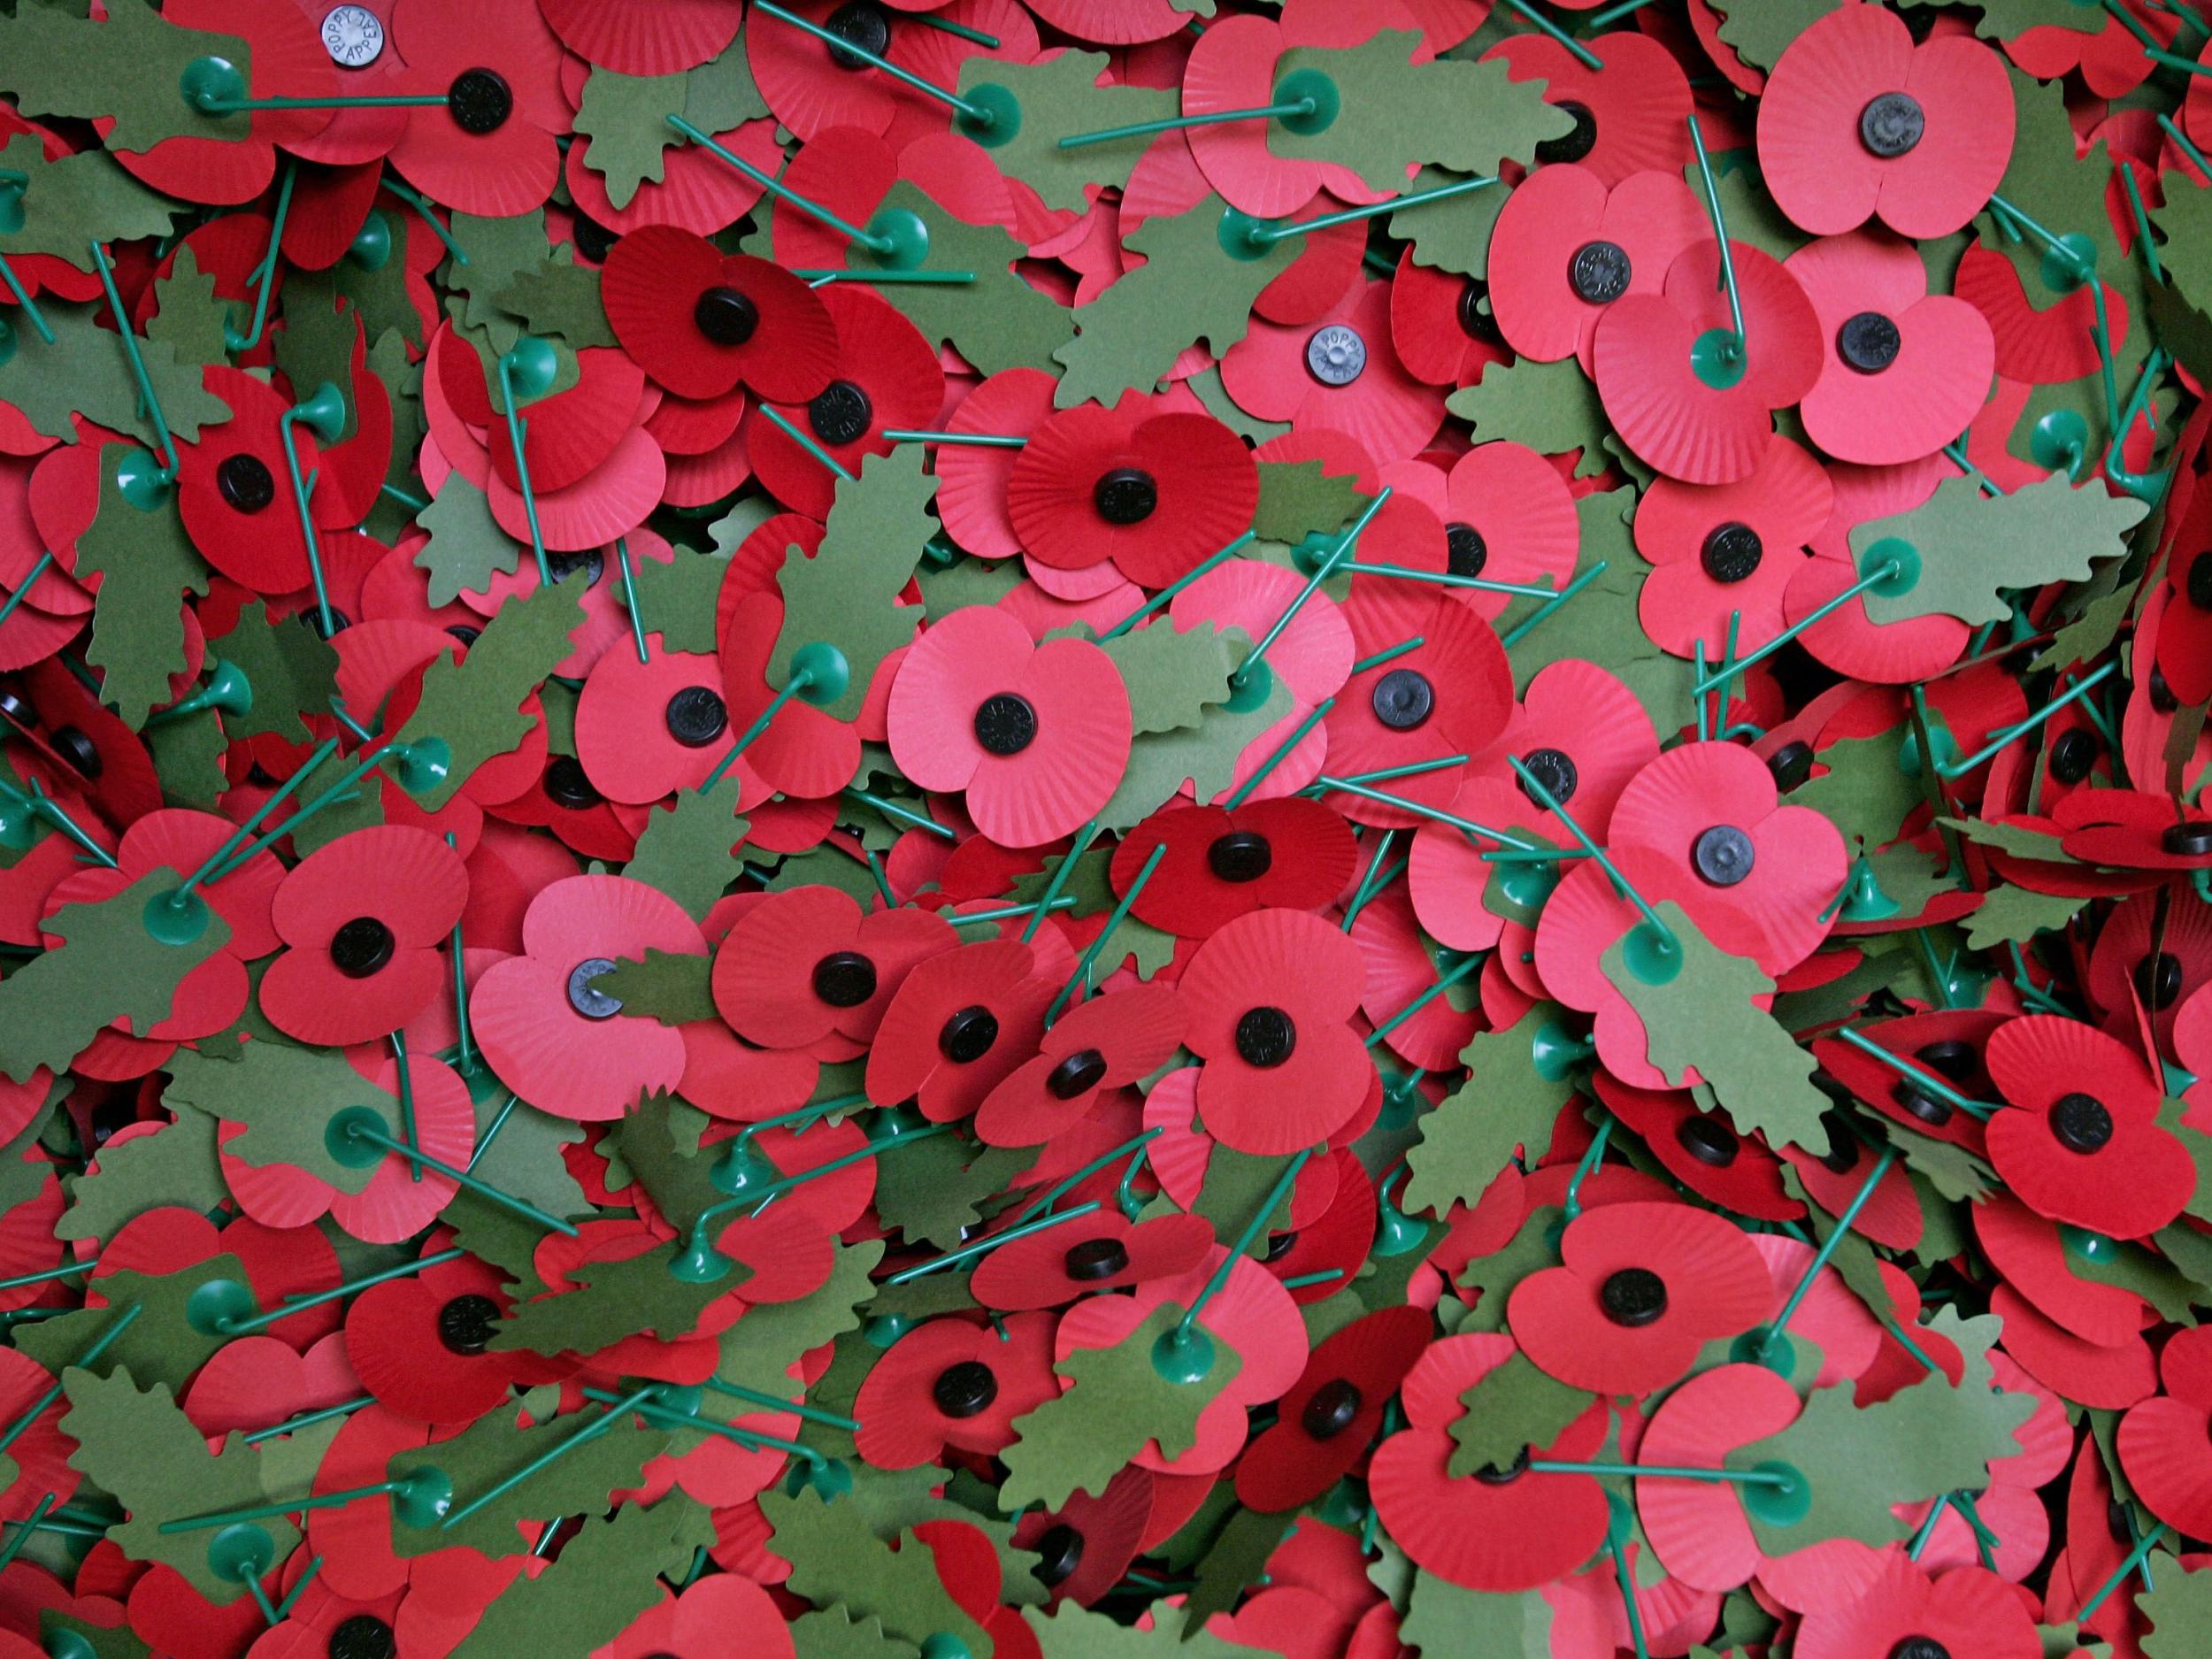 The poppy was first used a symbol to remember fallen soldiers in the poem In Flanders Fields by John McCrae